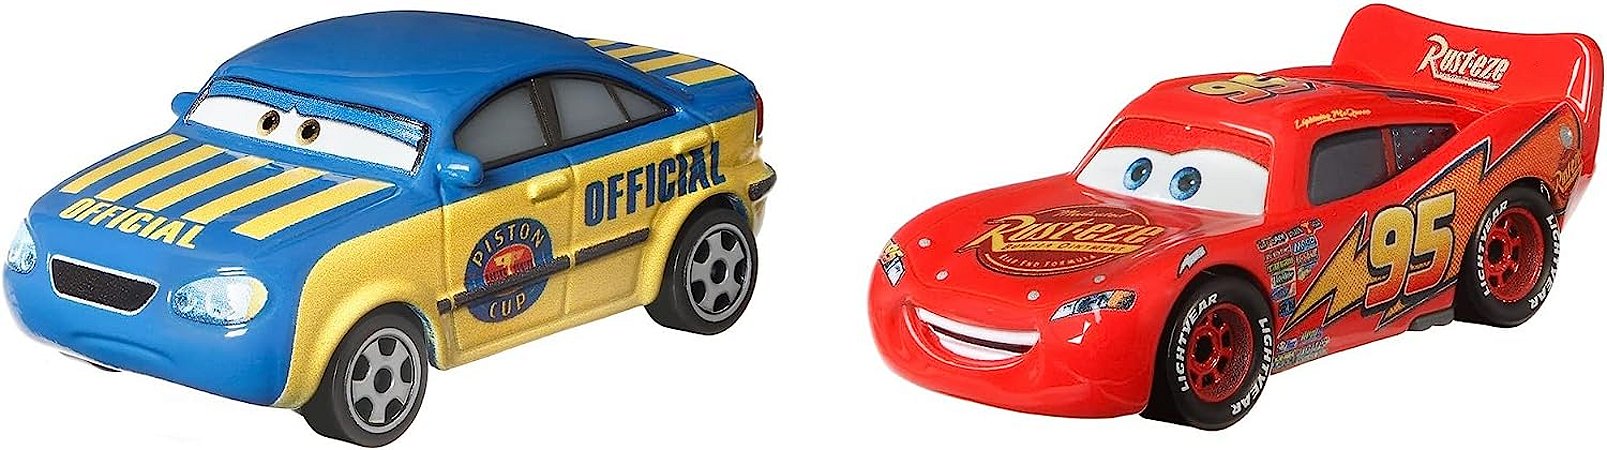 Disney and Pixar Cars 3, Race Official Tom & Lightning McQueen 2-Pack